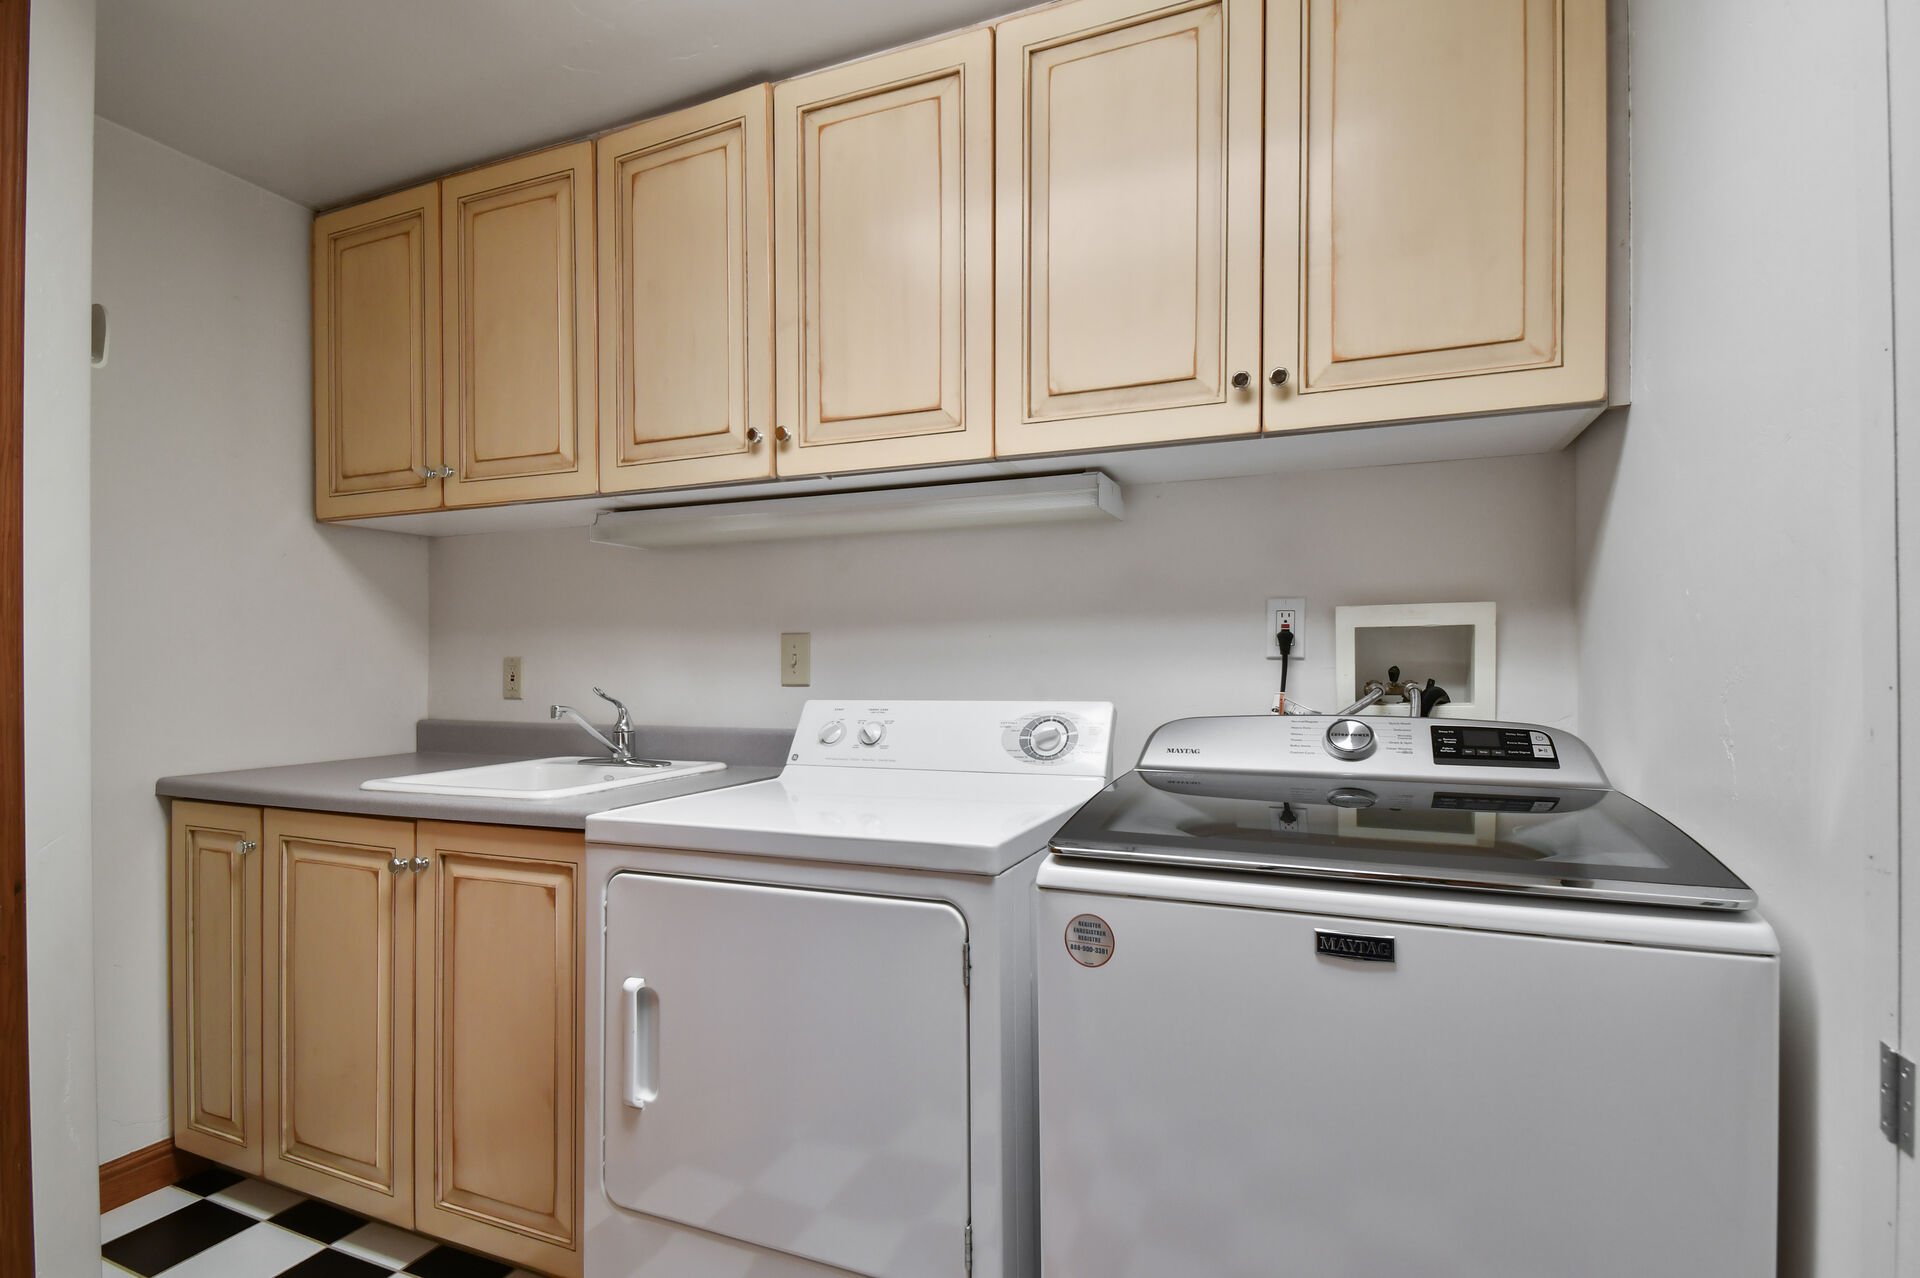 Spacious Washer/Dryer laundry room